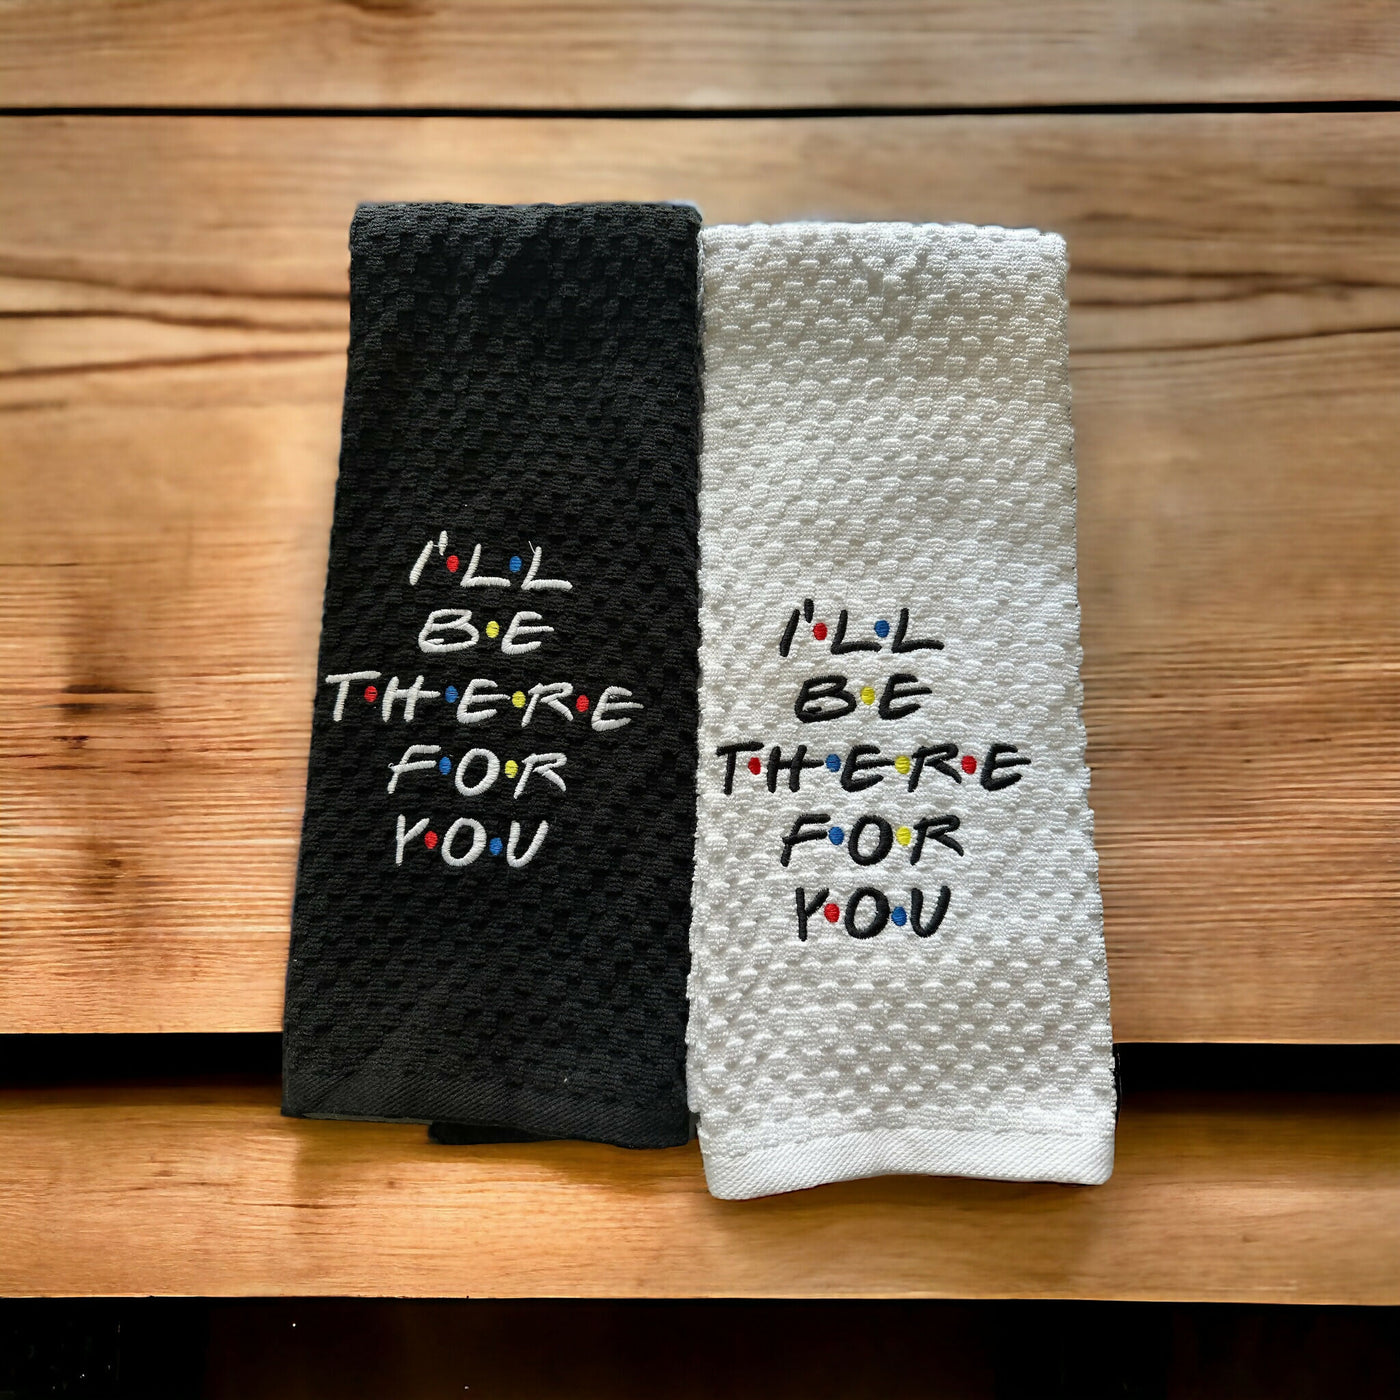 I'll be there for you Embroidered Kitchen Towel